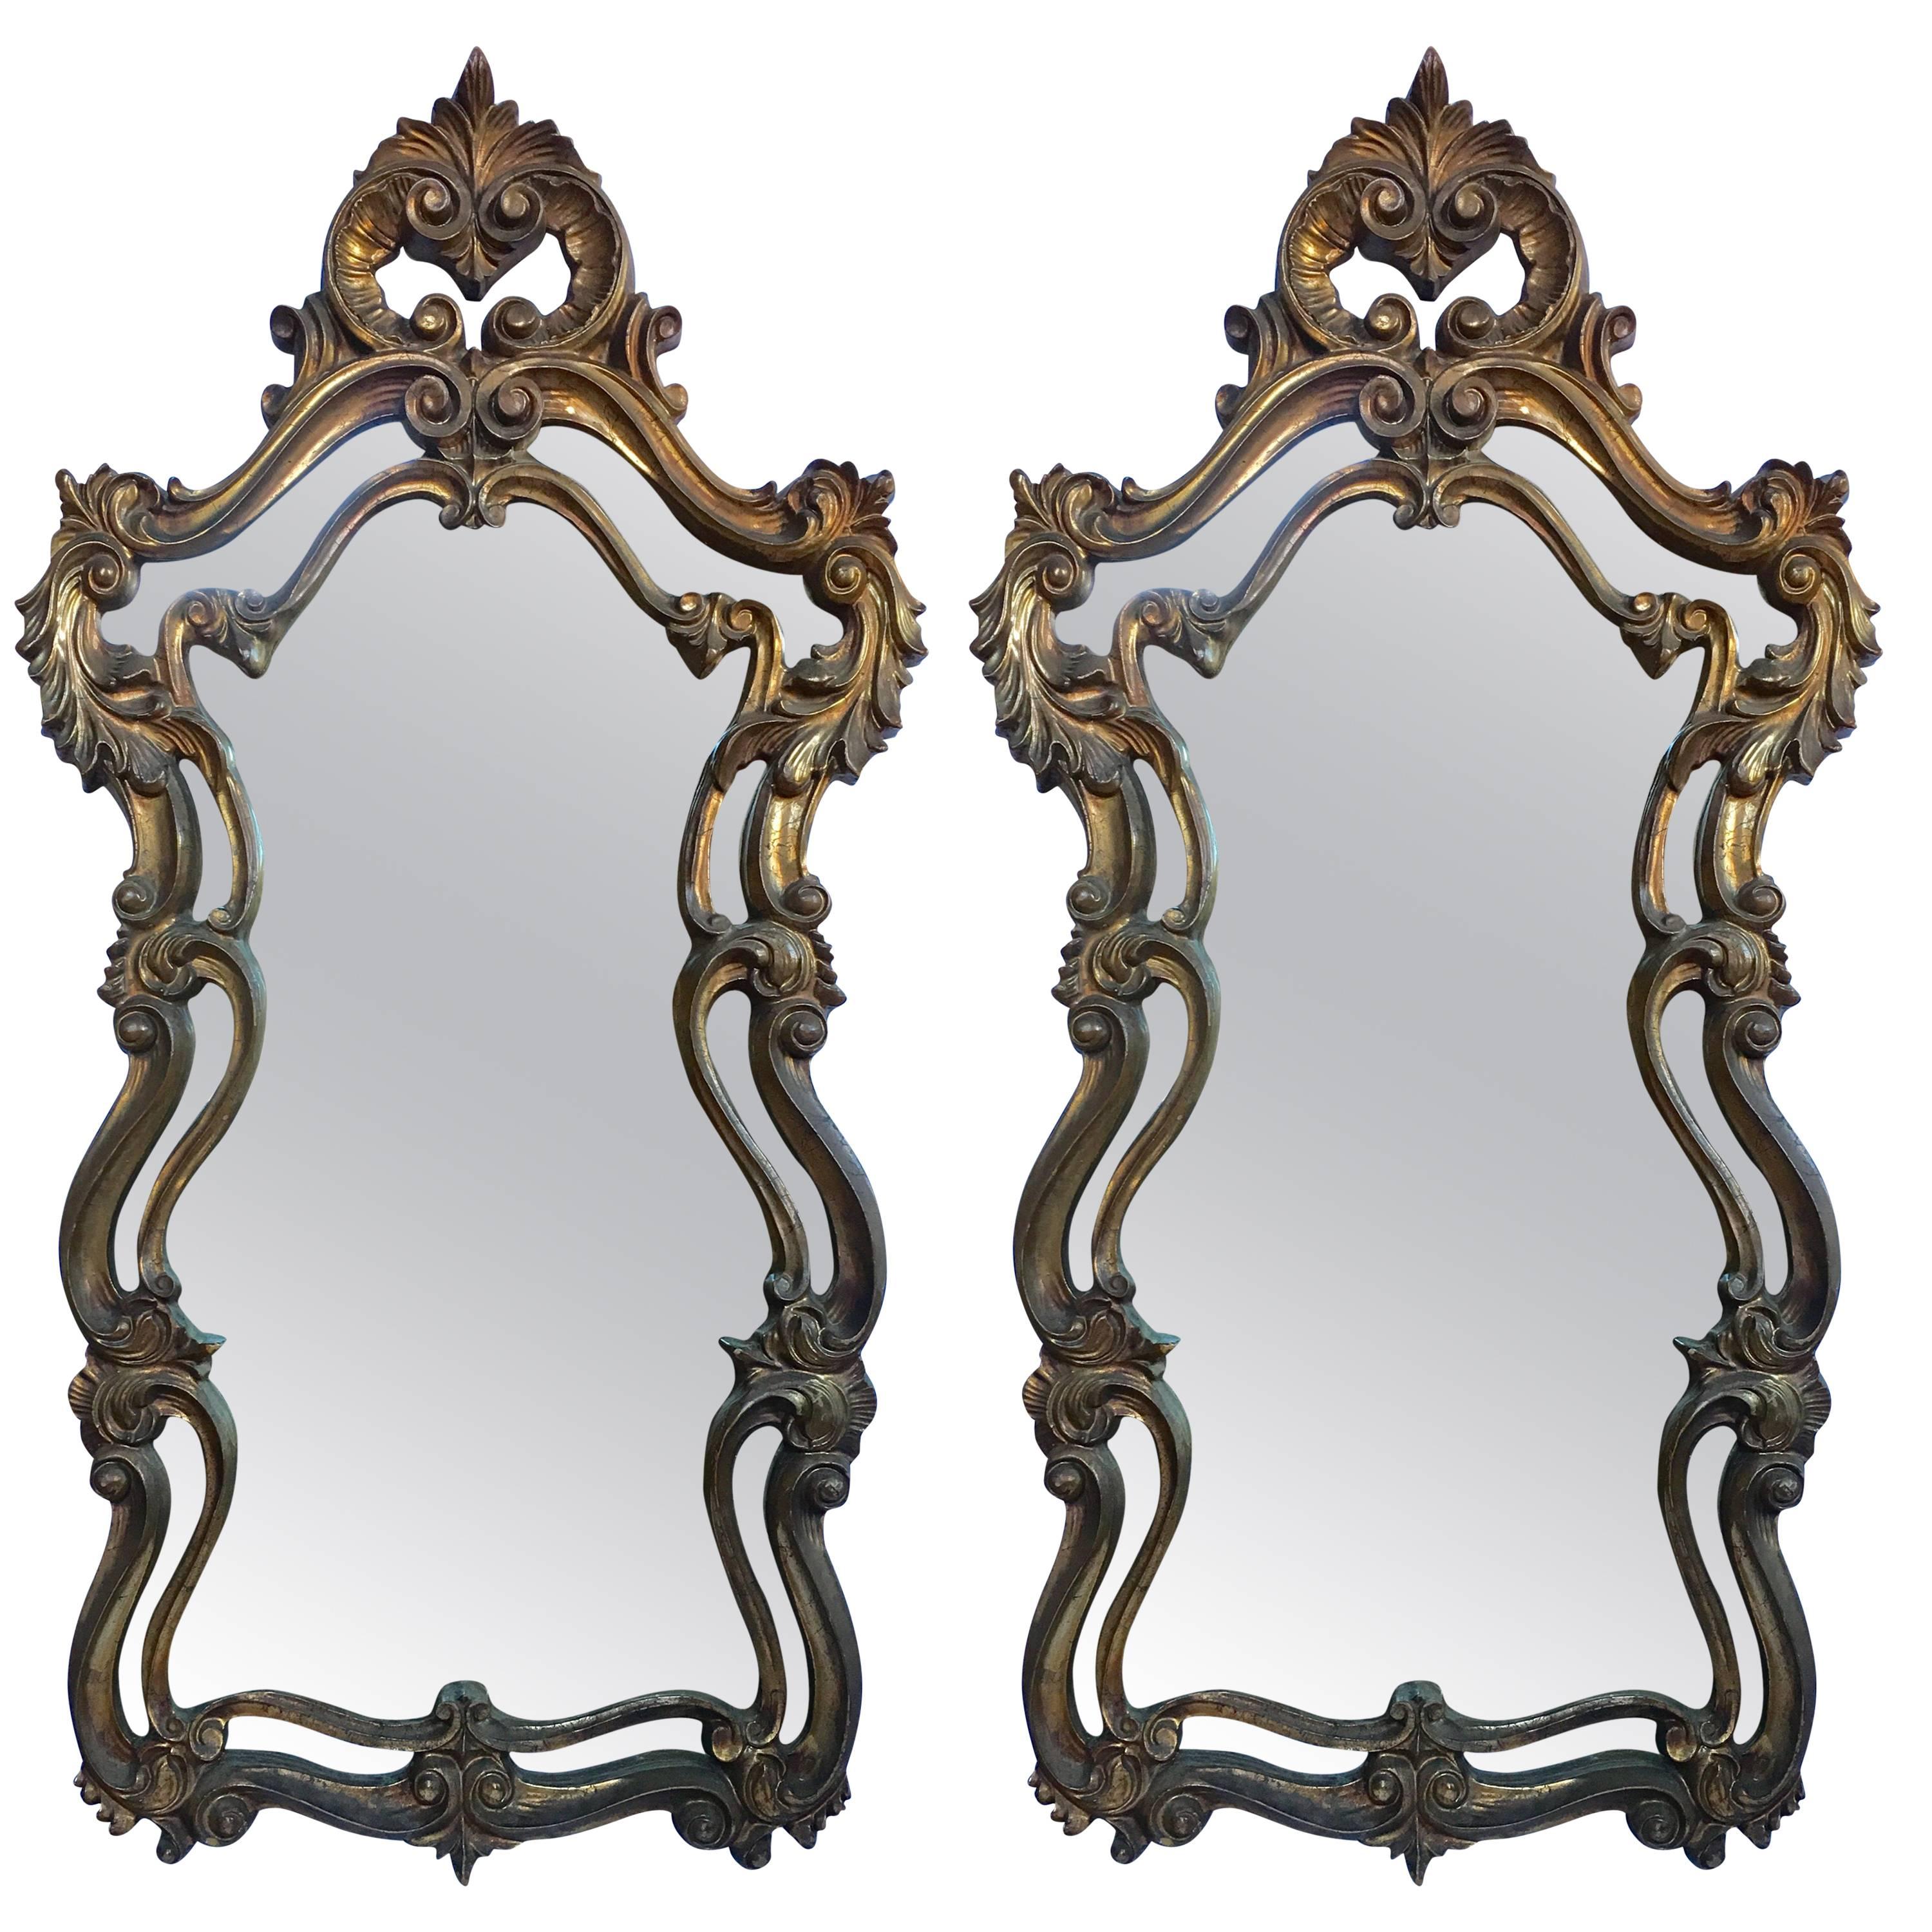 Pair of Rococo Style Wall Mirrors